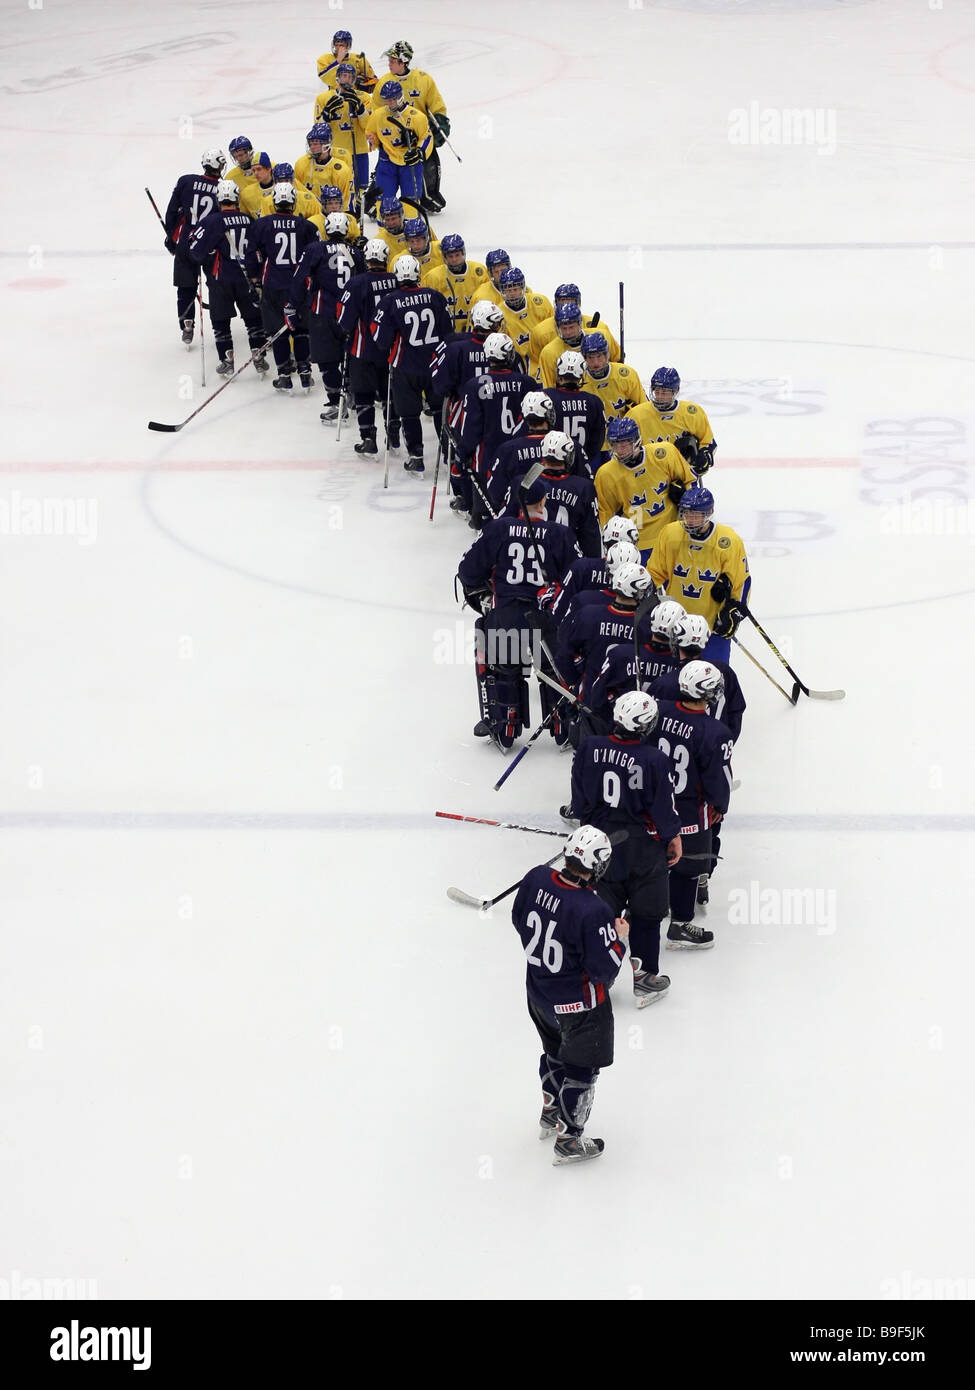 US and Swedish U18 ice-hockey teams shaking hands after the game that ended with a 3-2 US victory. Stock Photo